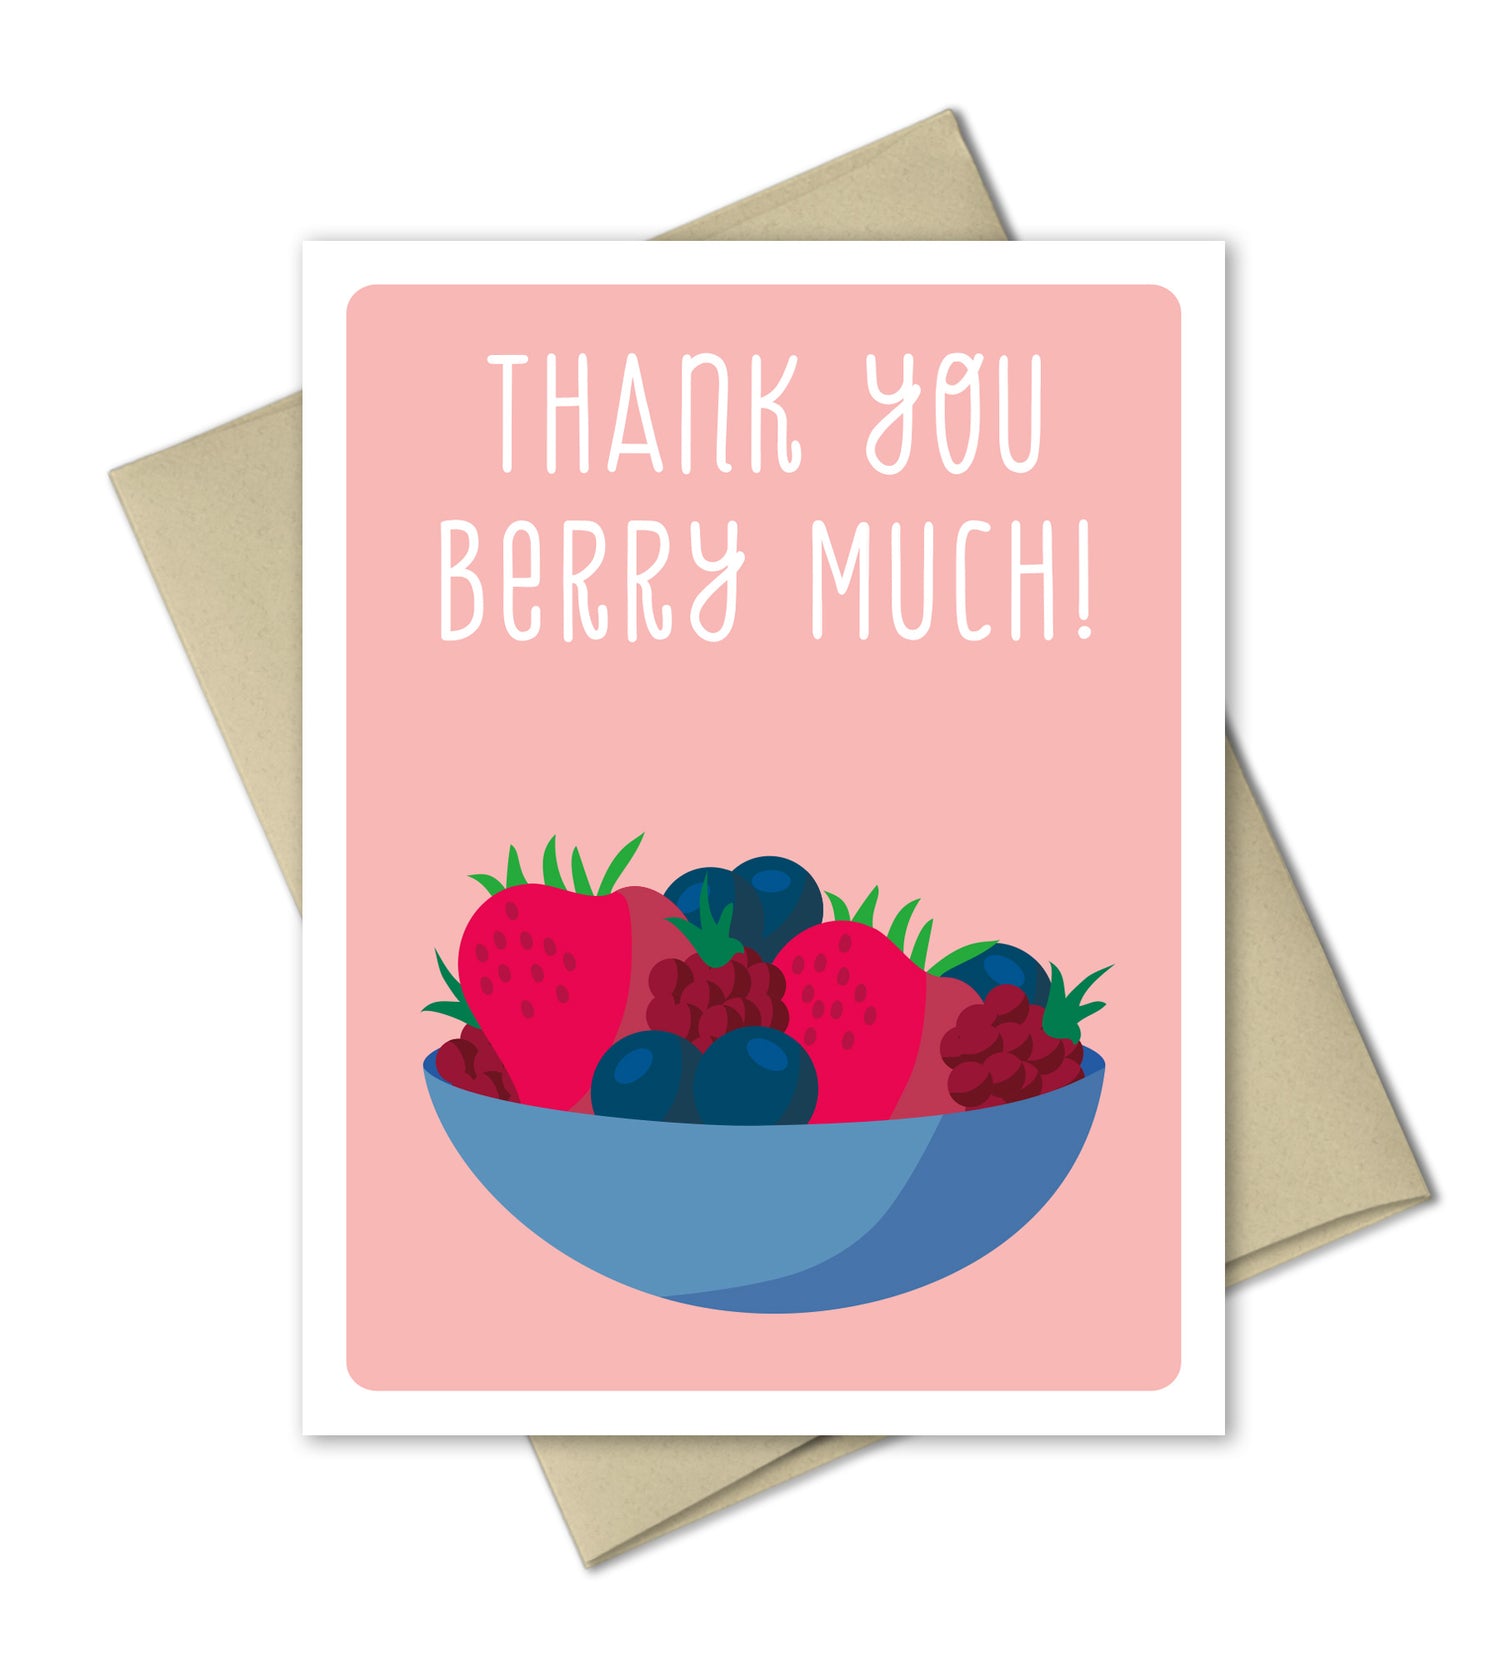 Thank You Card - Berry Much - The Imagination Spot